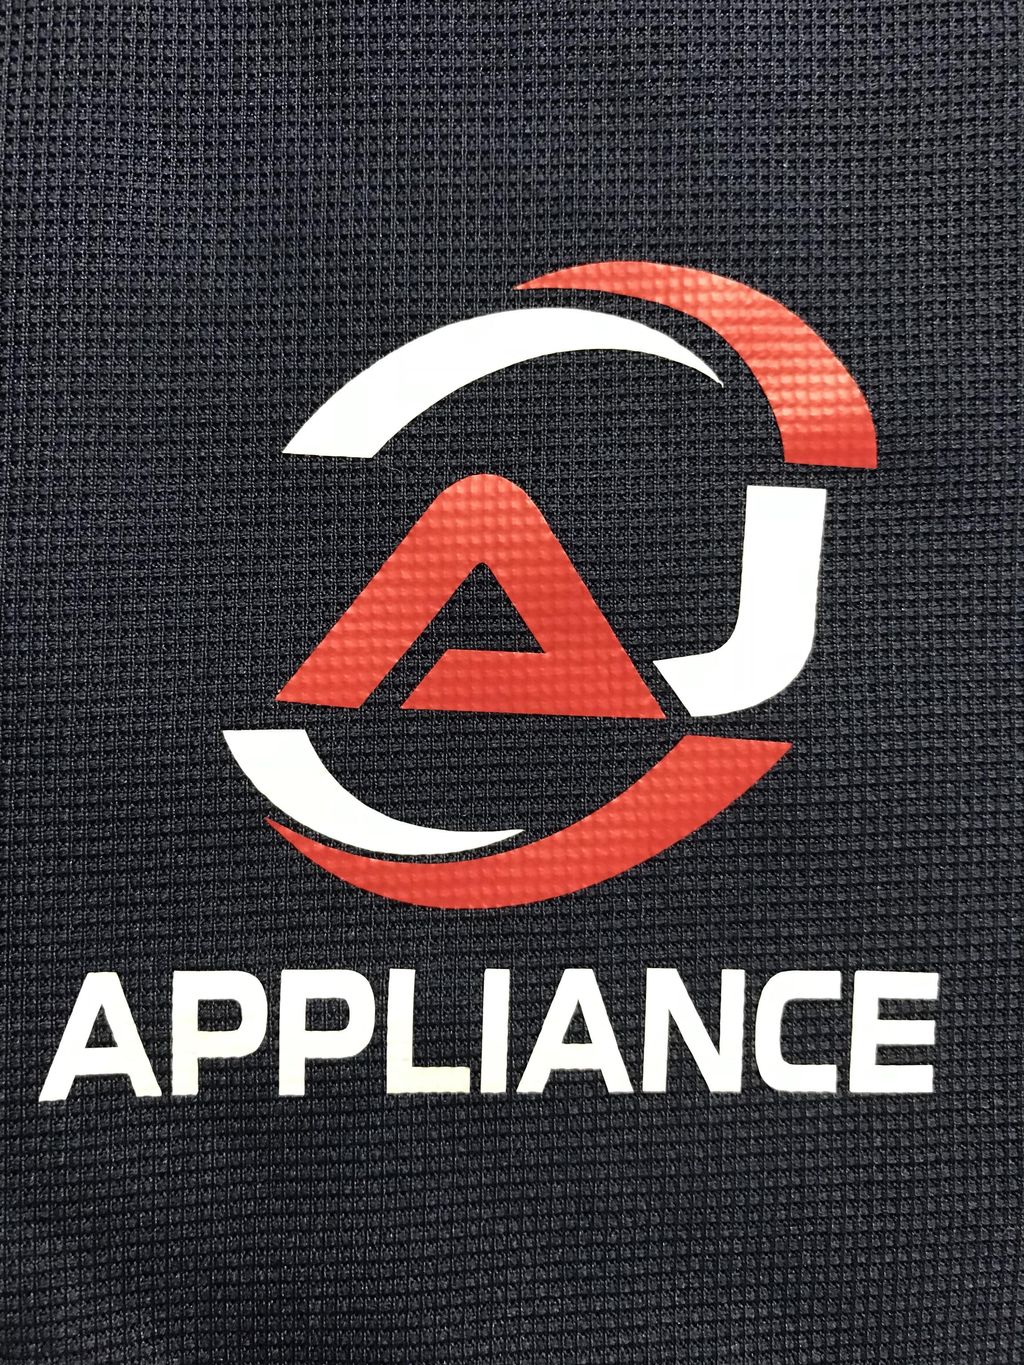 A&J Appliance Installation and Repair Inc